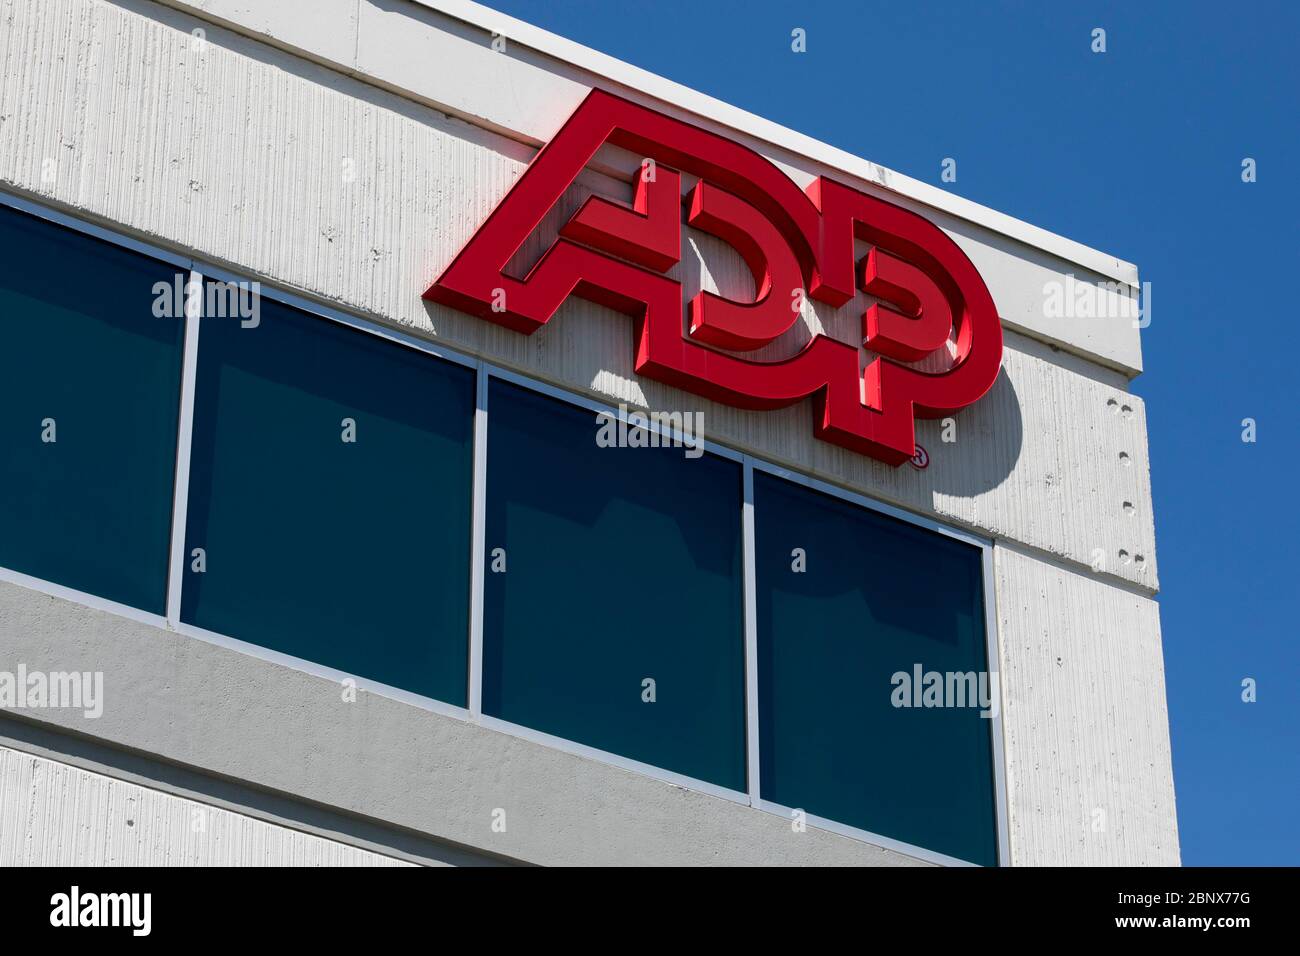 A logo sign outside of a facility occupied by Automatic Data Processing (ADP) in Norfolk, Virginia on May 2, 2020. Stock Photo